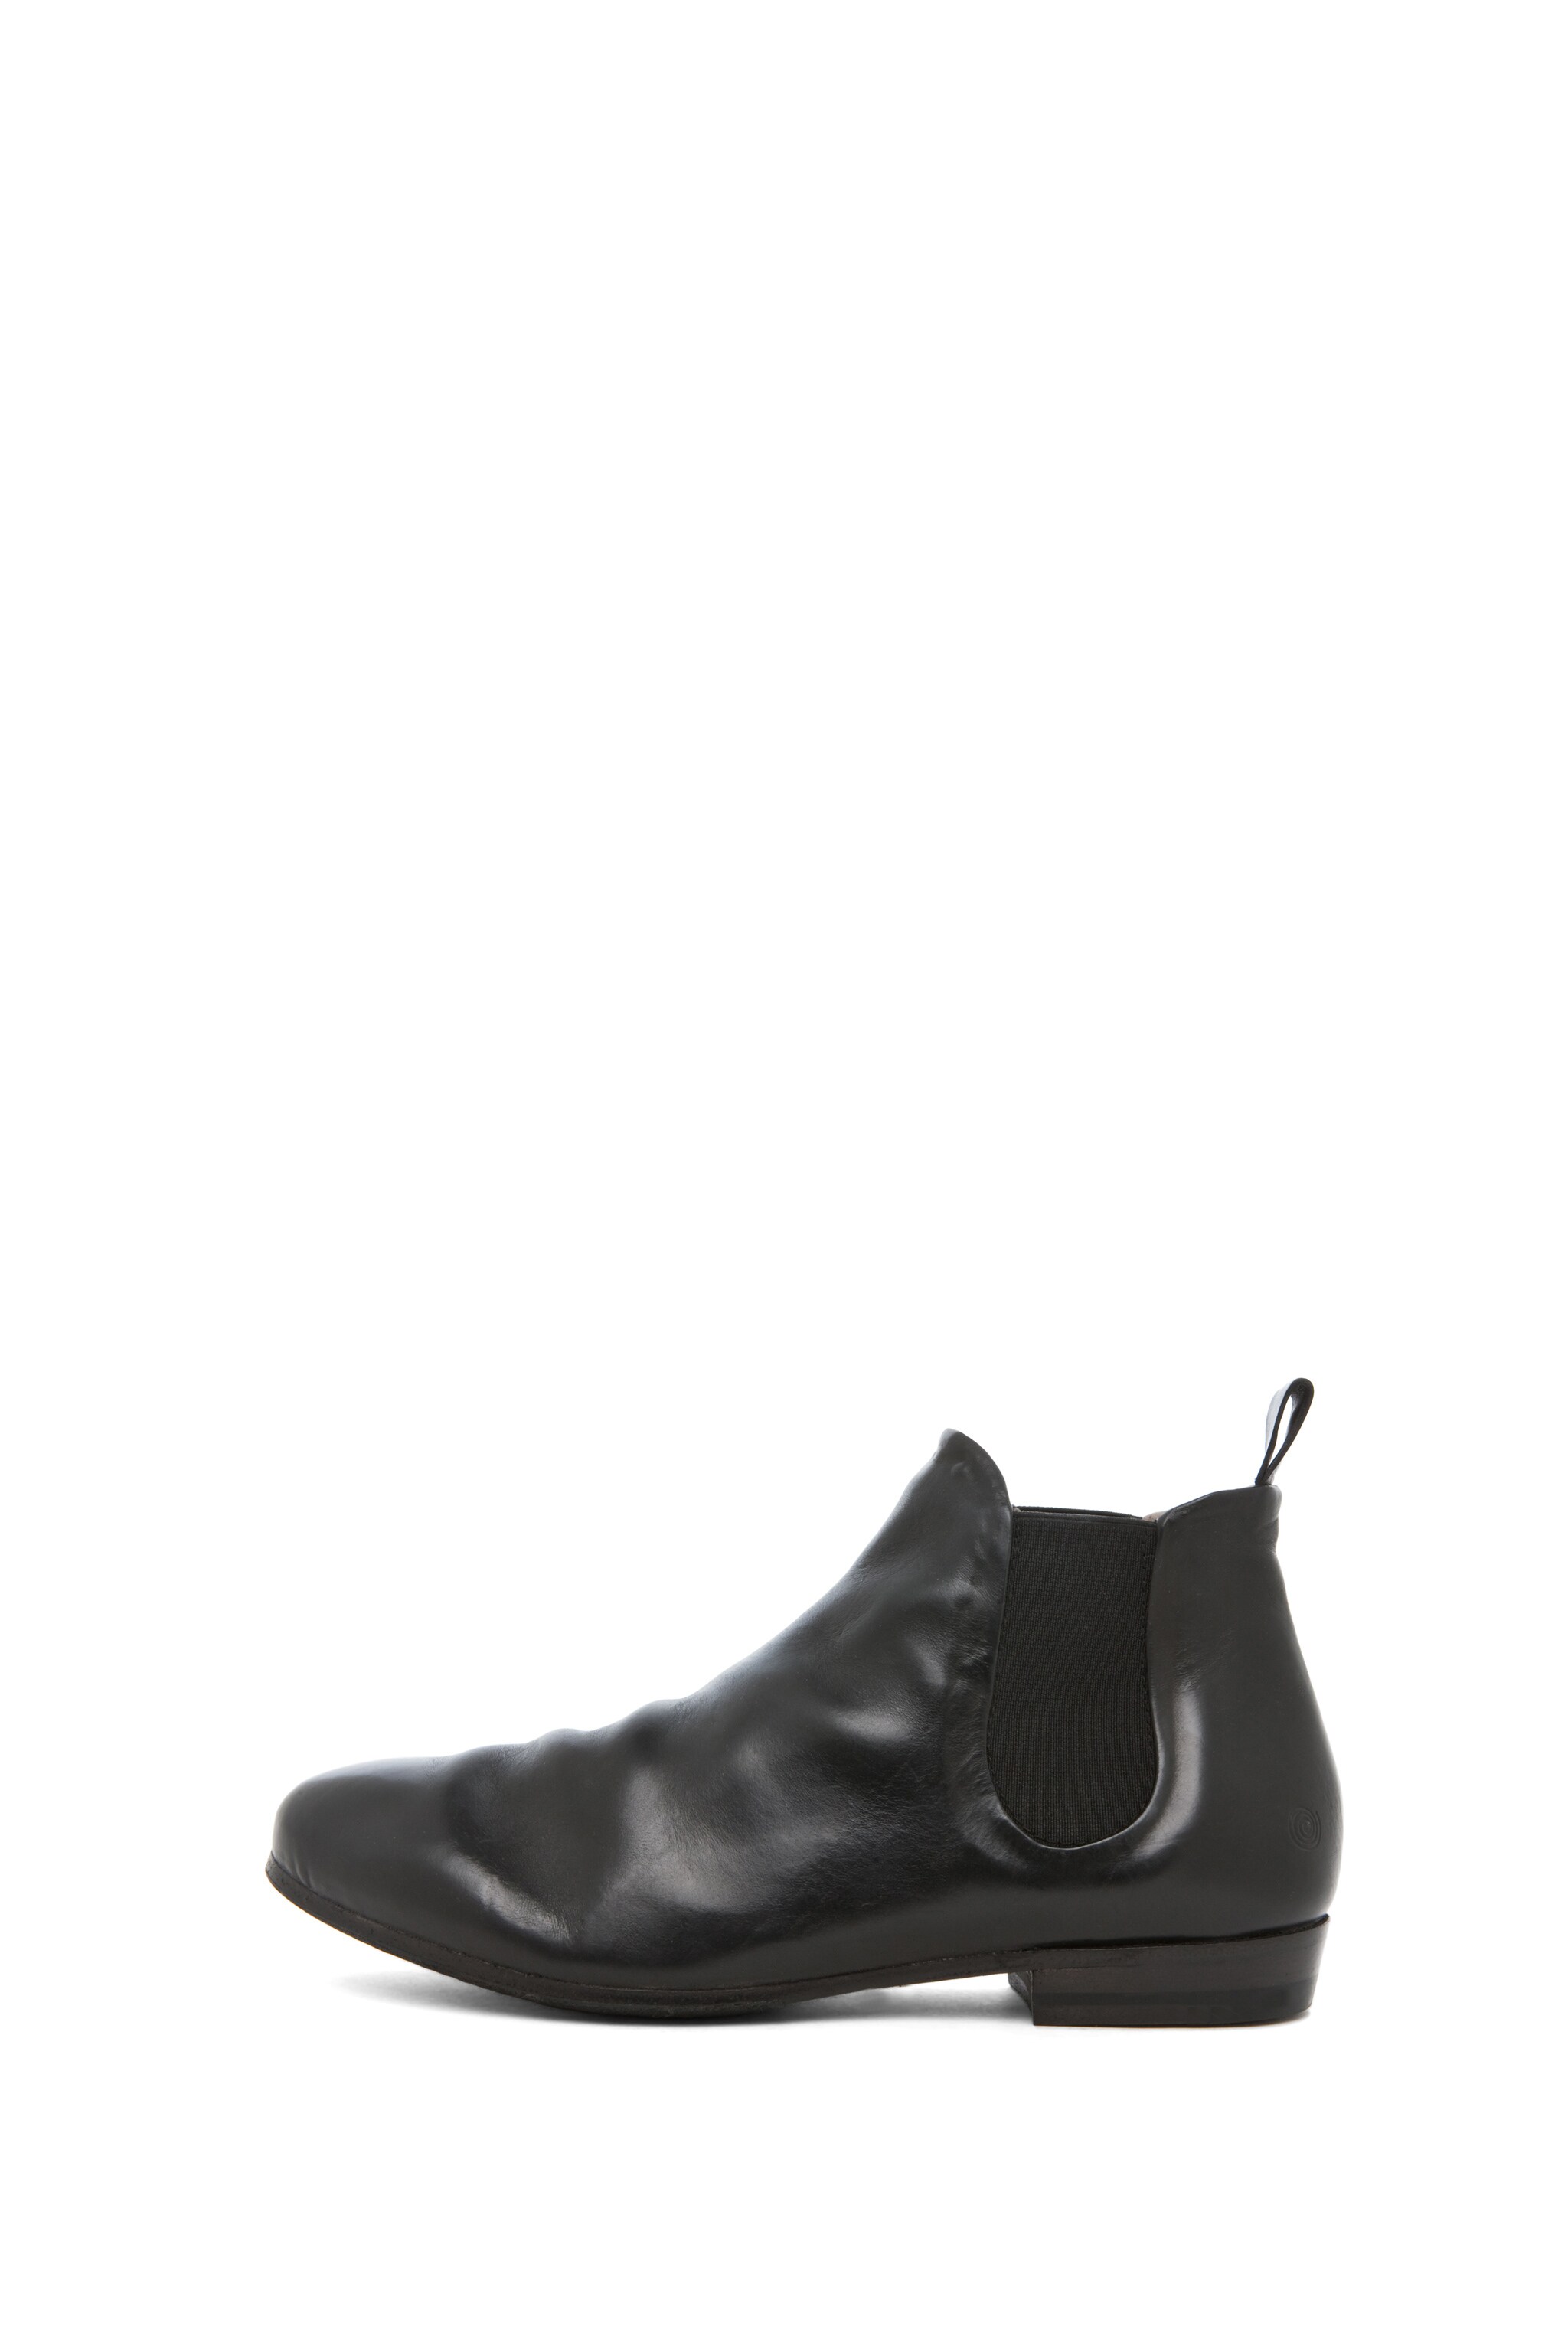 Image 1 of Marsell Torsolo Bootie in Black